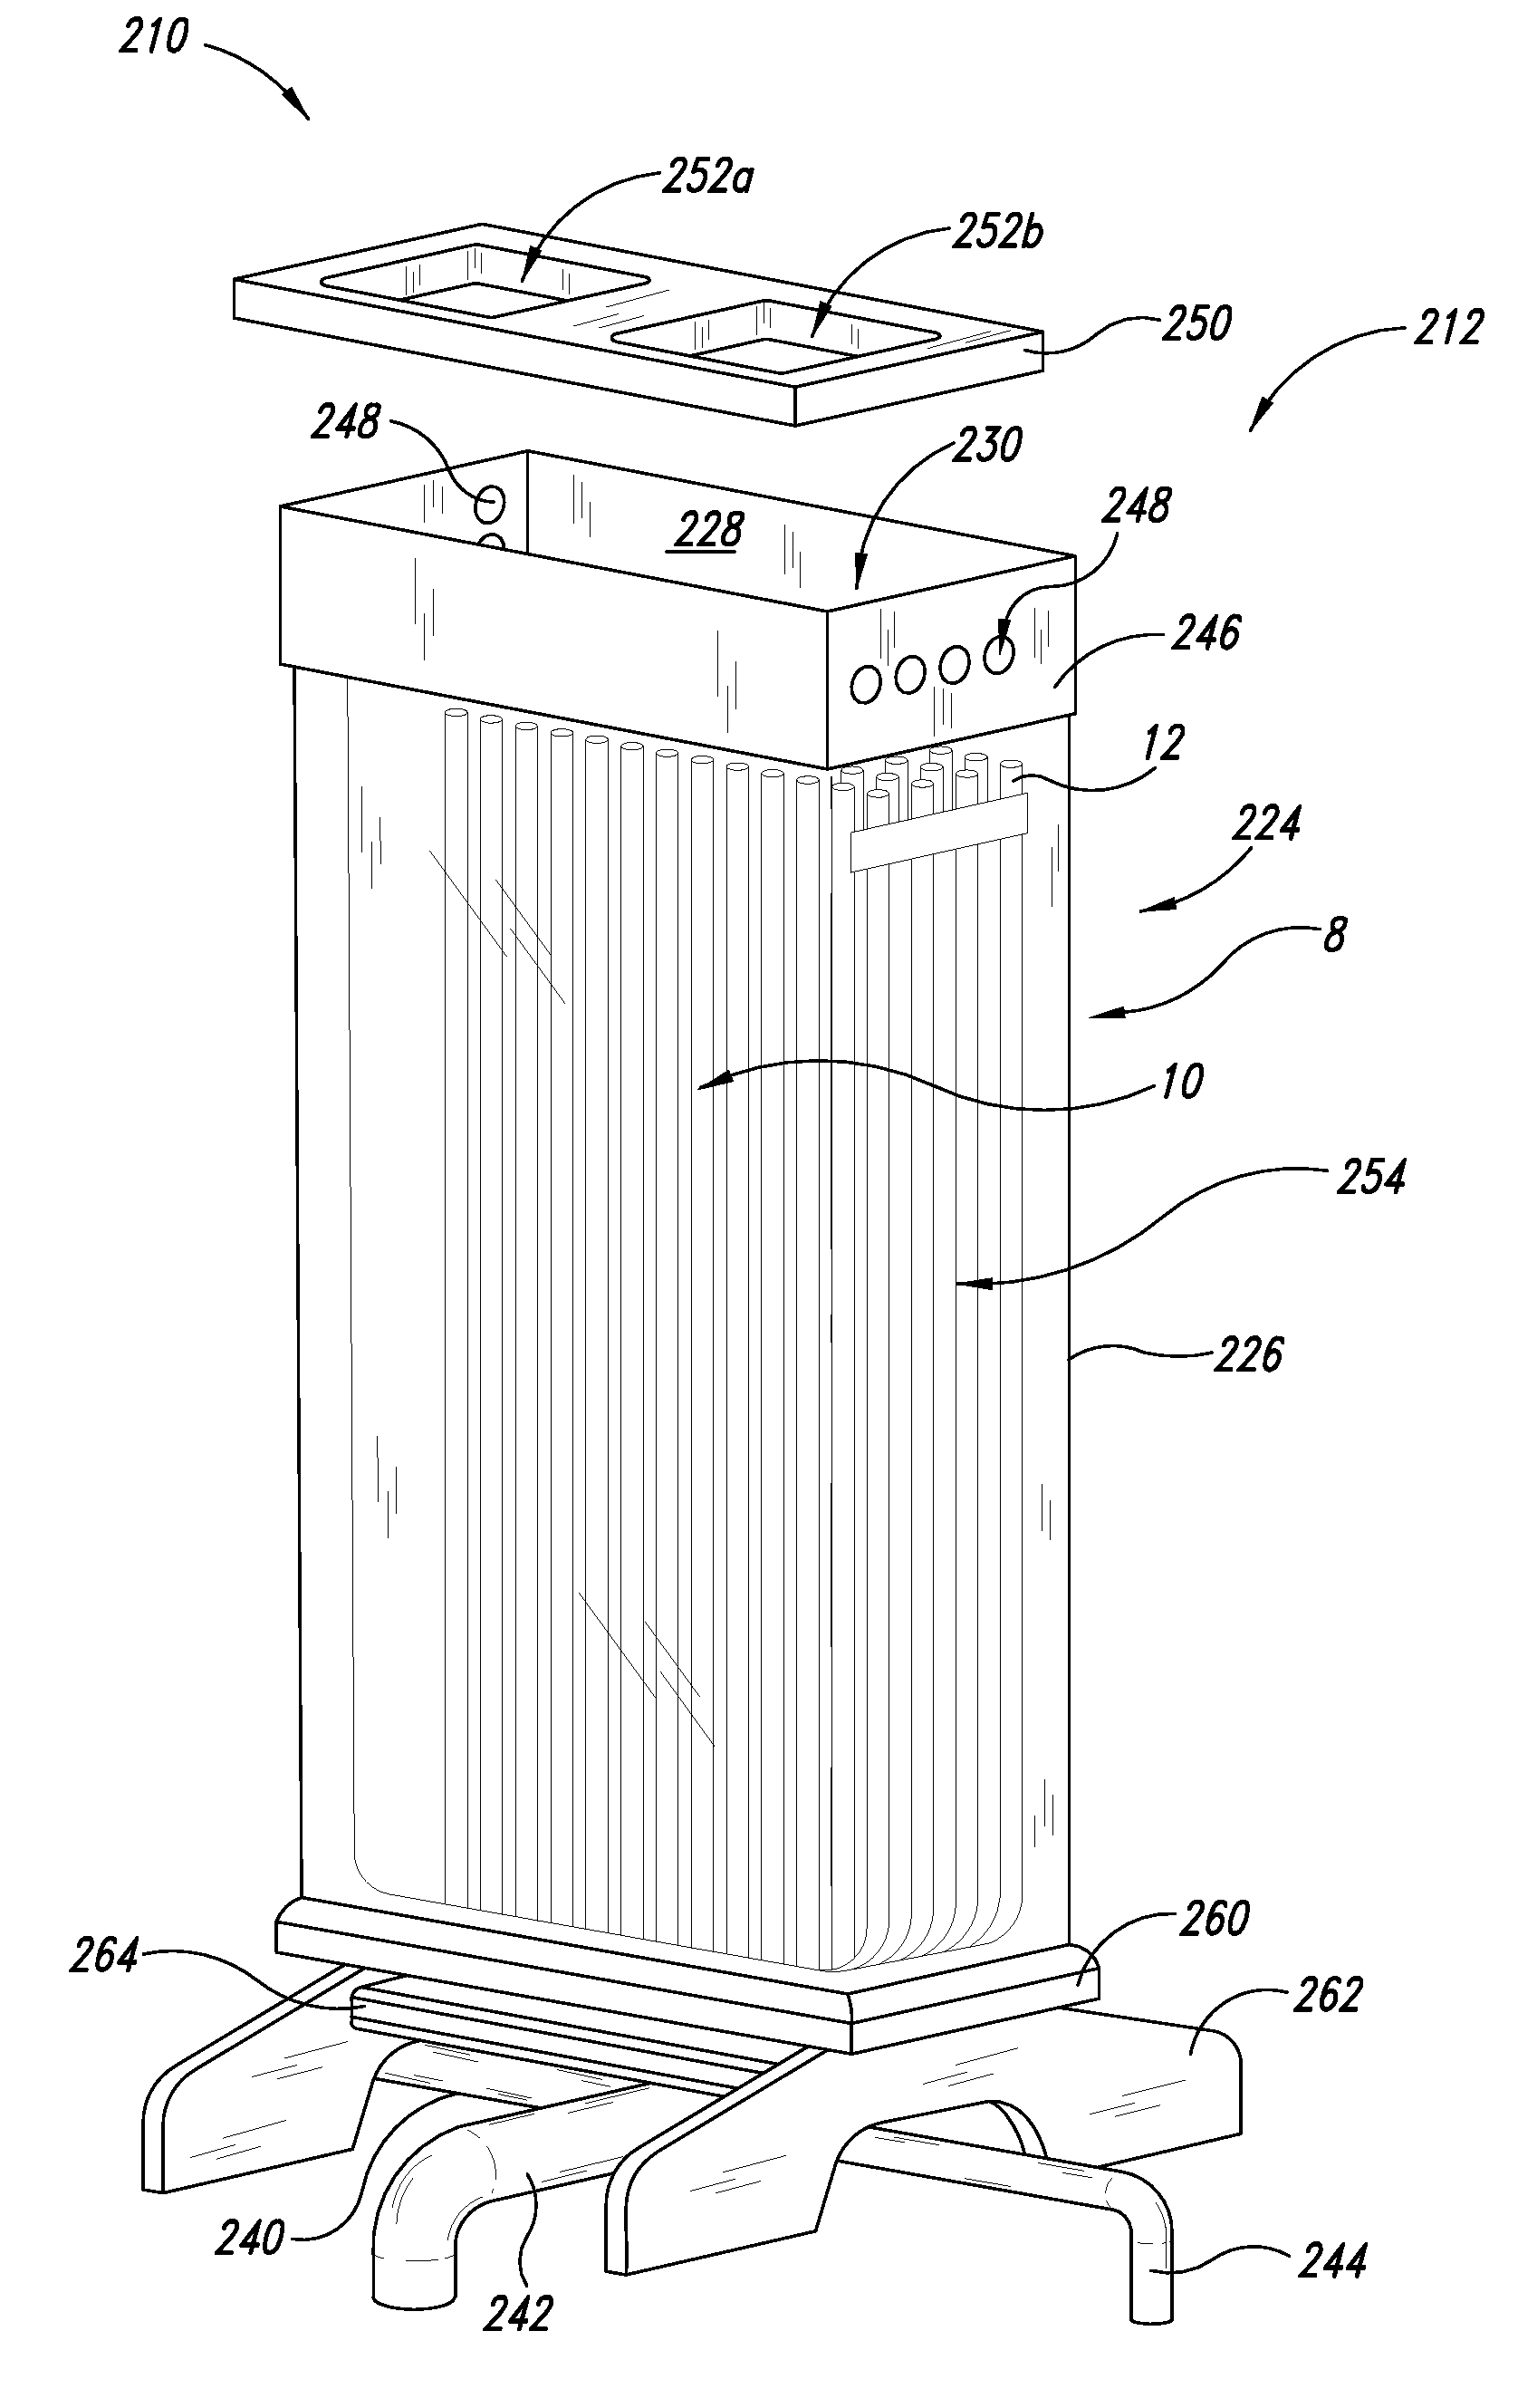 Illumination systems, devices, and methods for biomass production